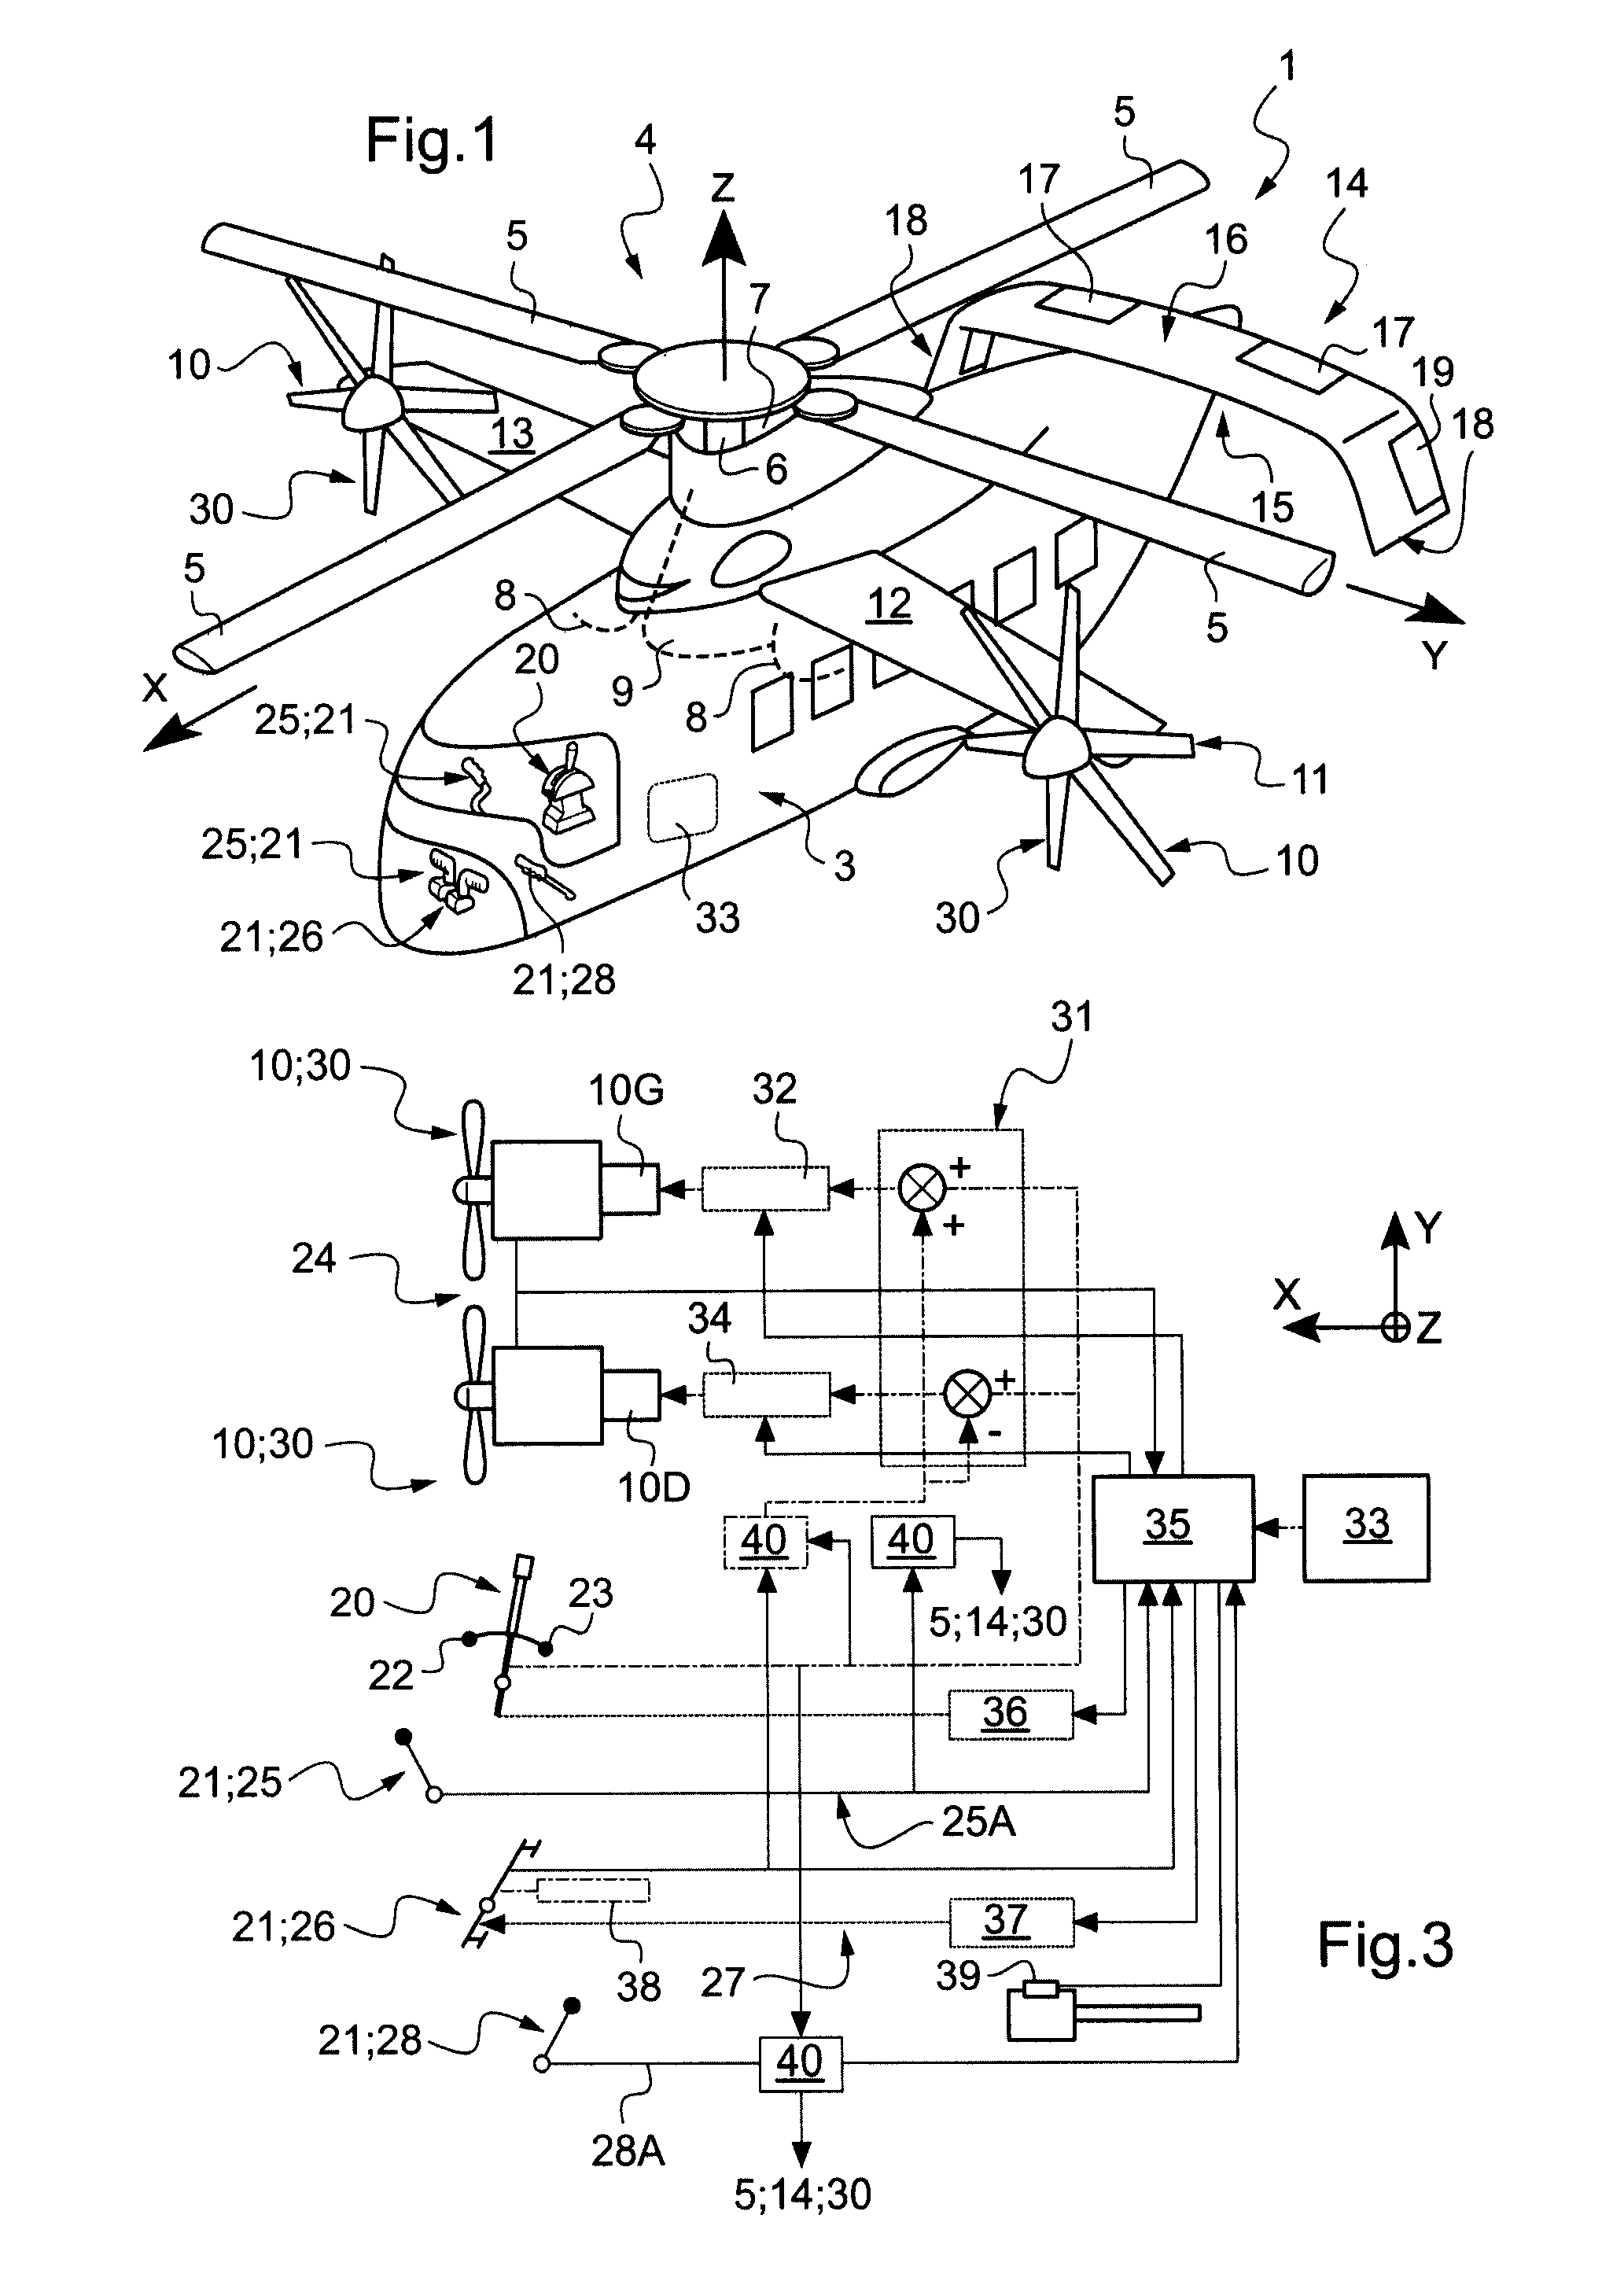 Variable ratio crank for a manual flight control linkage of a rotary wing aircraft